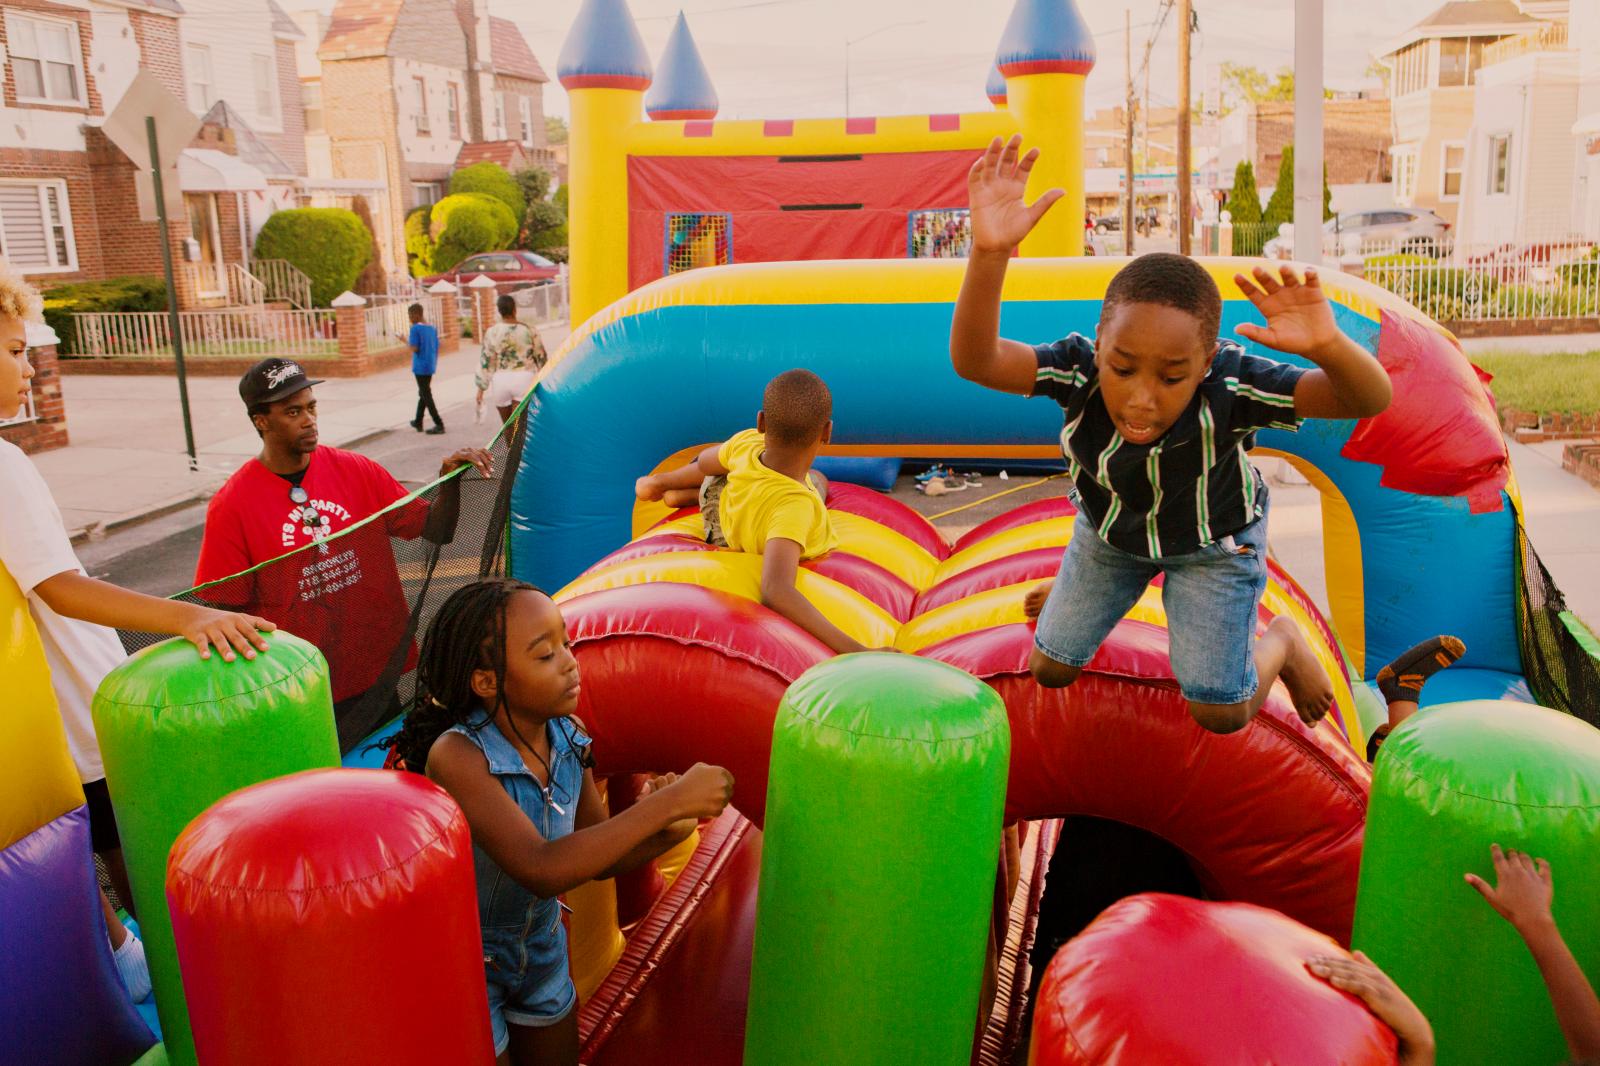 Benjamin Burton, 7, plays with inflatable obstacle course from ItsMyParty NYC during the block party in Laurelton neighborhood in Queens, New York hosted by Sudan Deane.